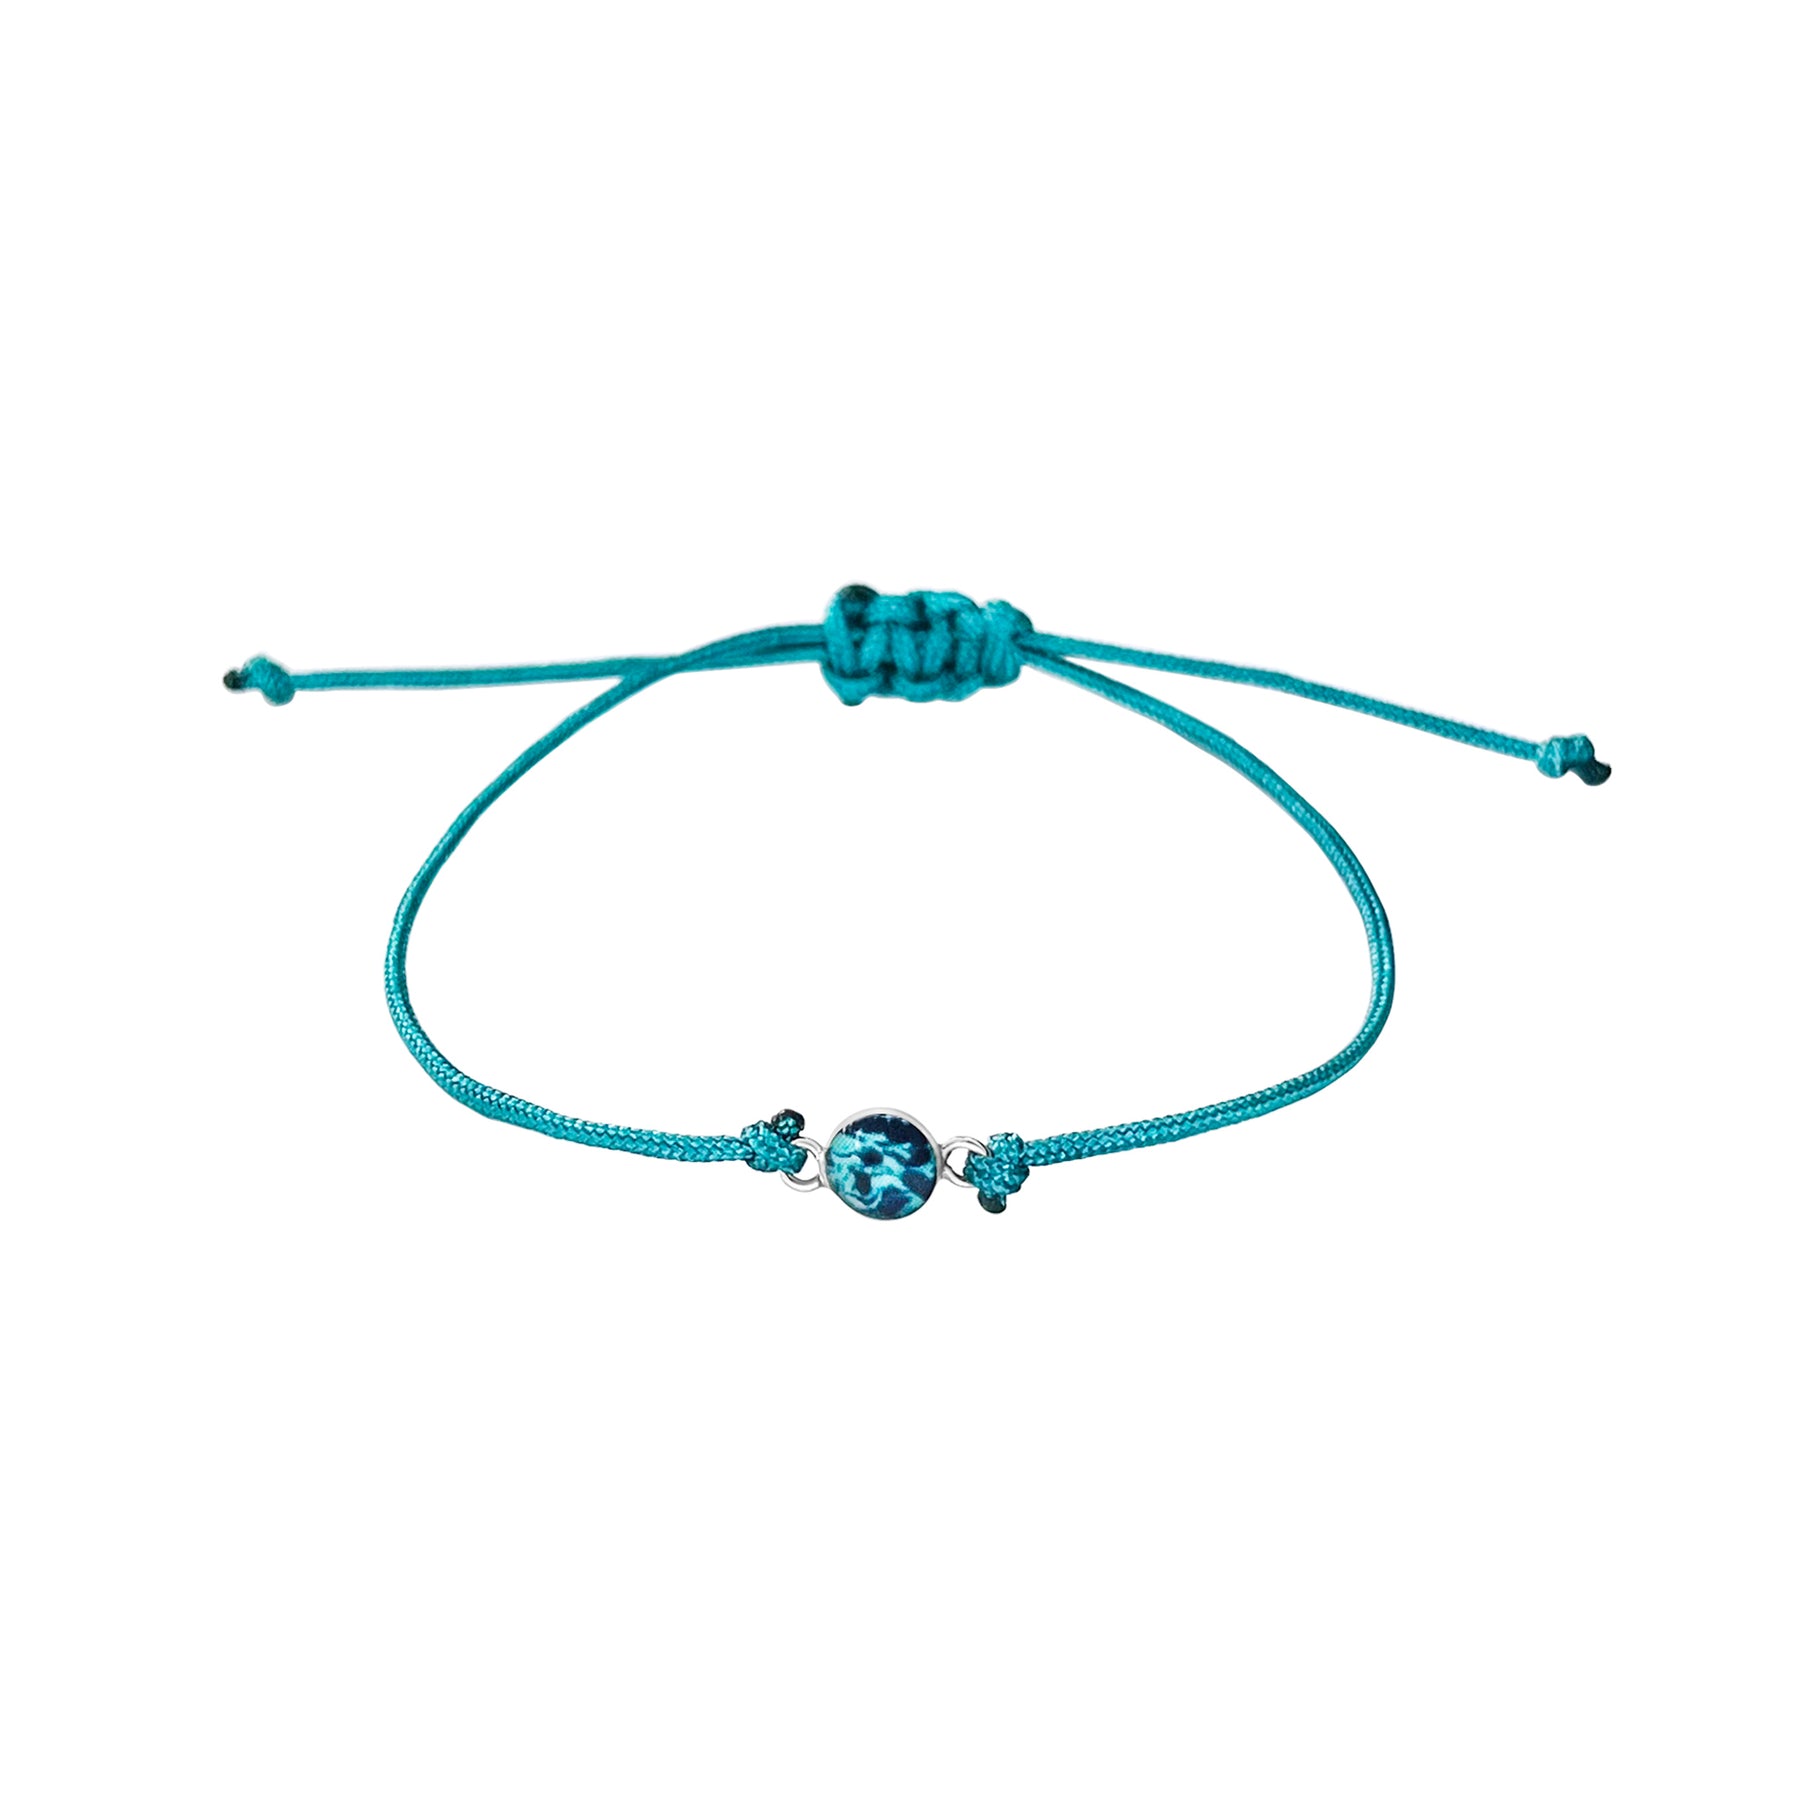 Awareness Bracelets for Cancer, Illness & Disease: Jewelry for a Cause ...